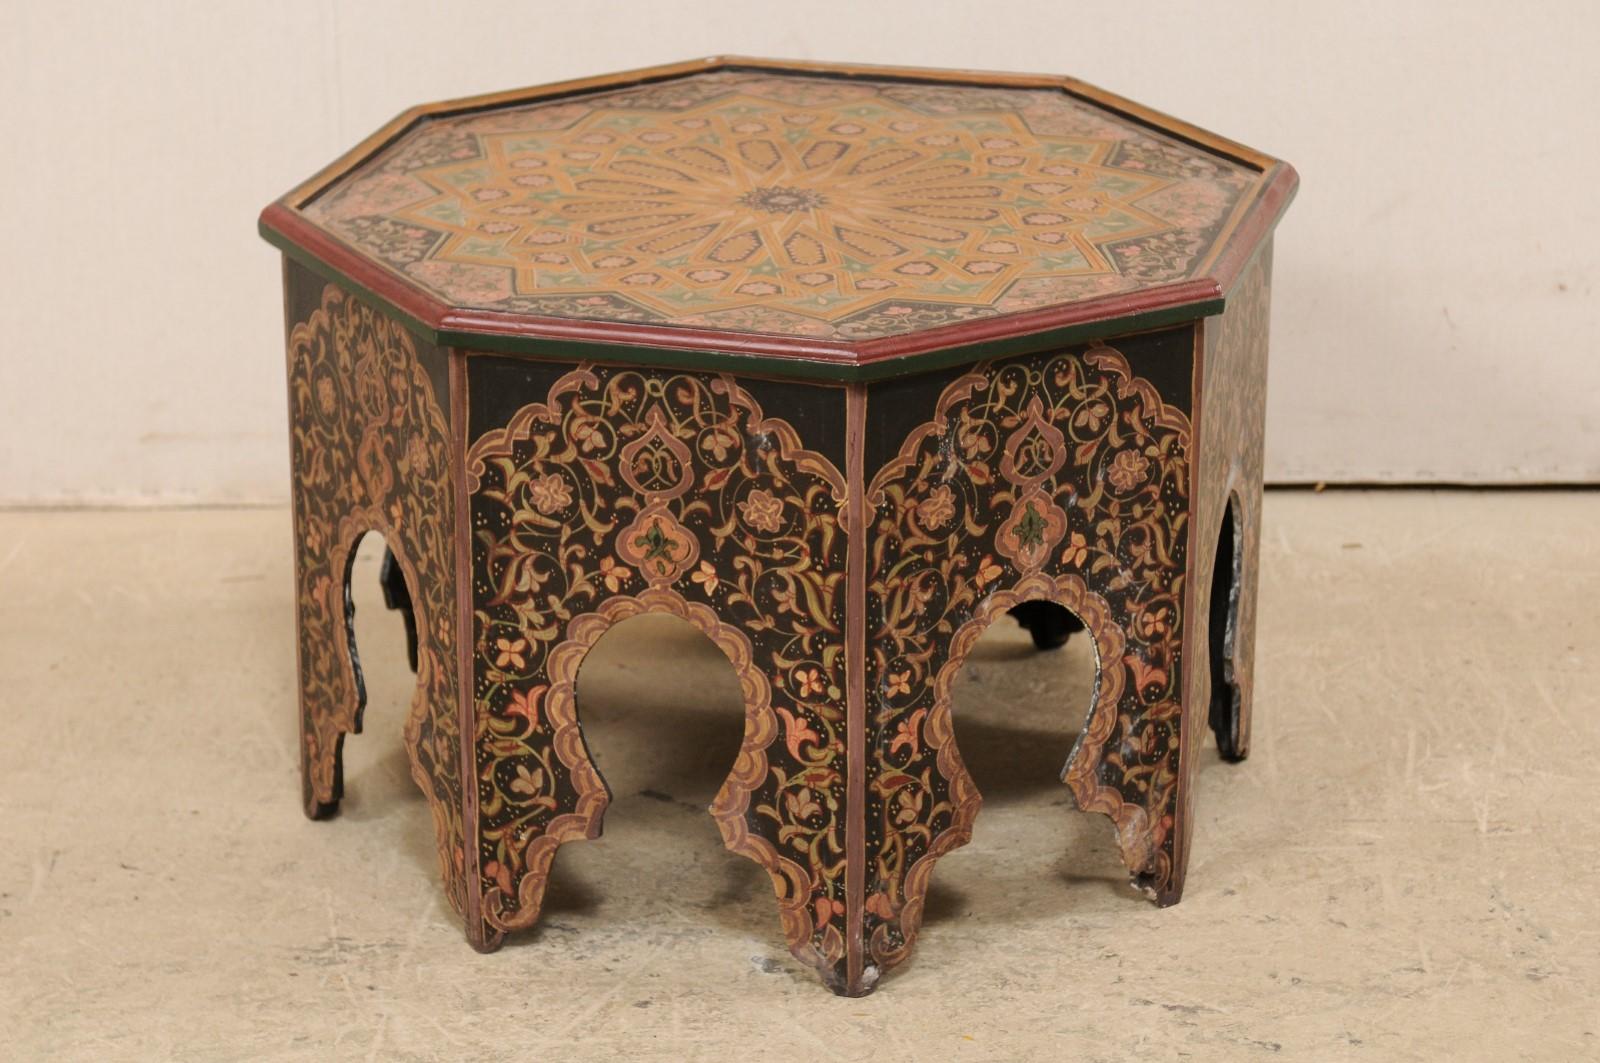 Wood Moroccan Coffee or Tea Table Adorn with Intricate Floral and Geometric Paintings